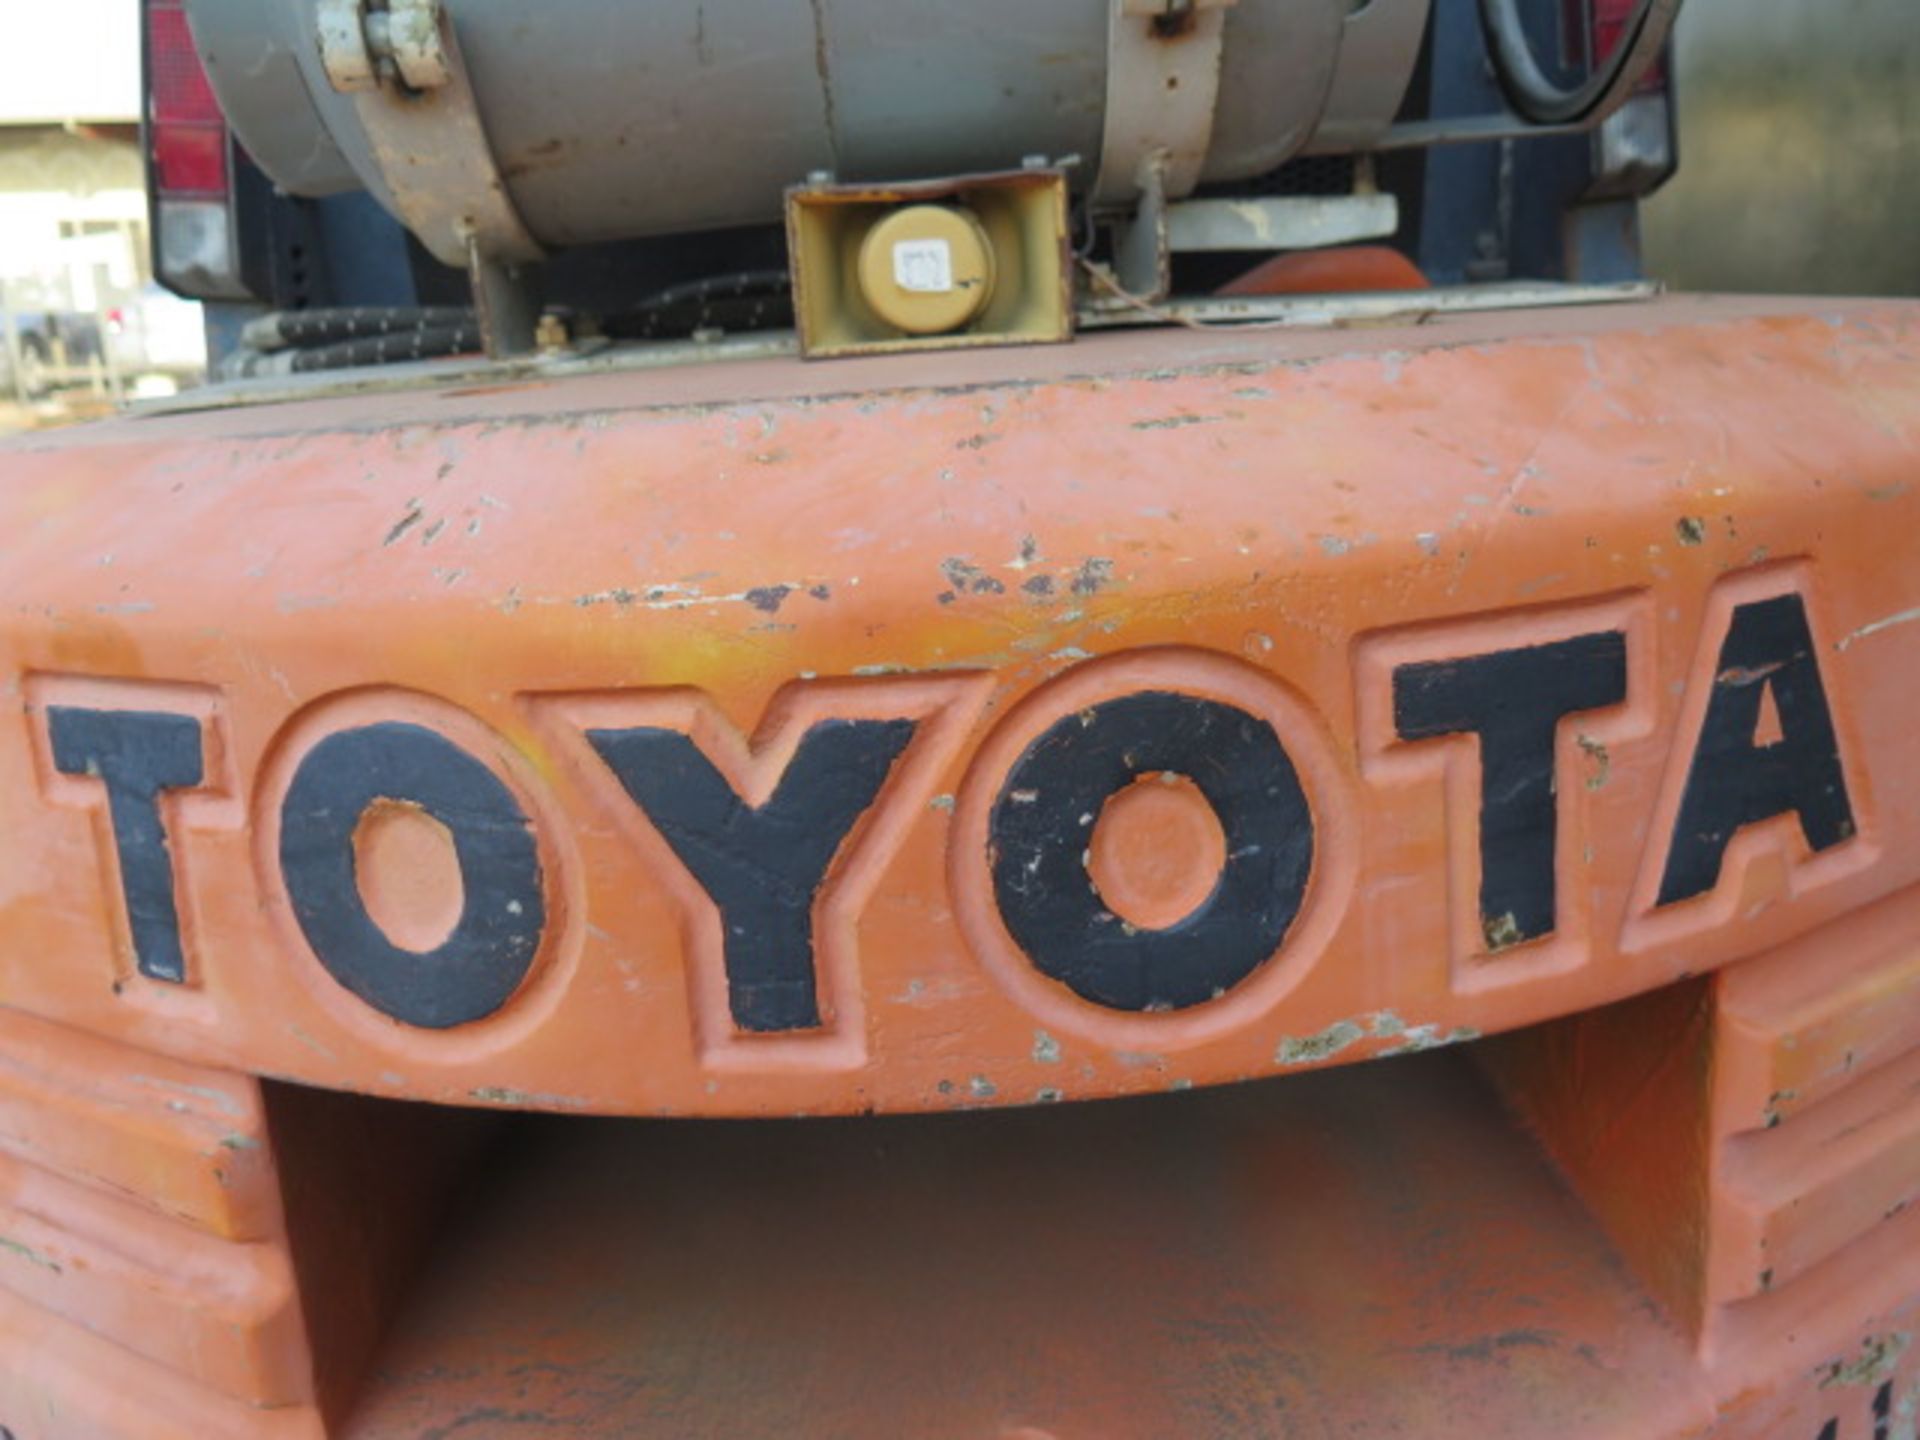 Toyota 02-5FGC30 5800 Lb Cap LPG Forklift s/n 5FGC30-11577 w/ 3-Stage Mast, Side Shift, SOLD AS IS - Image 11 of 11